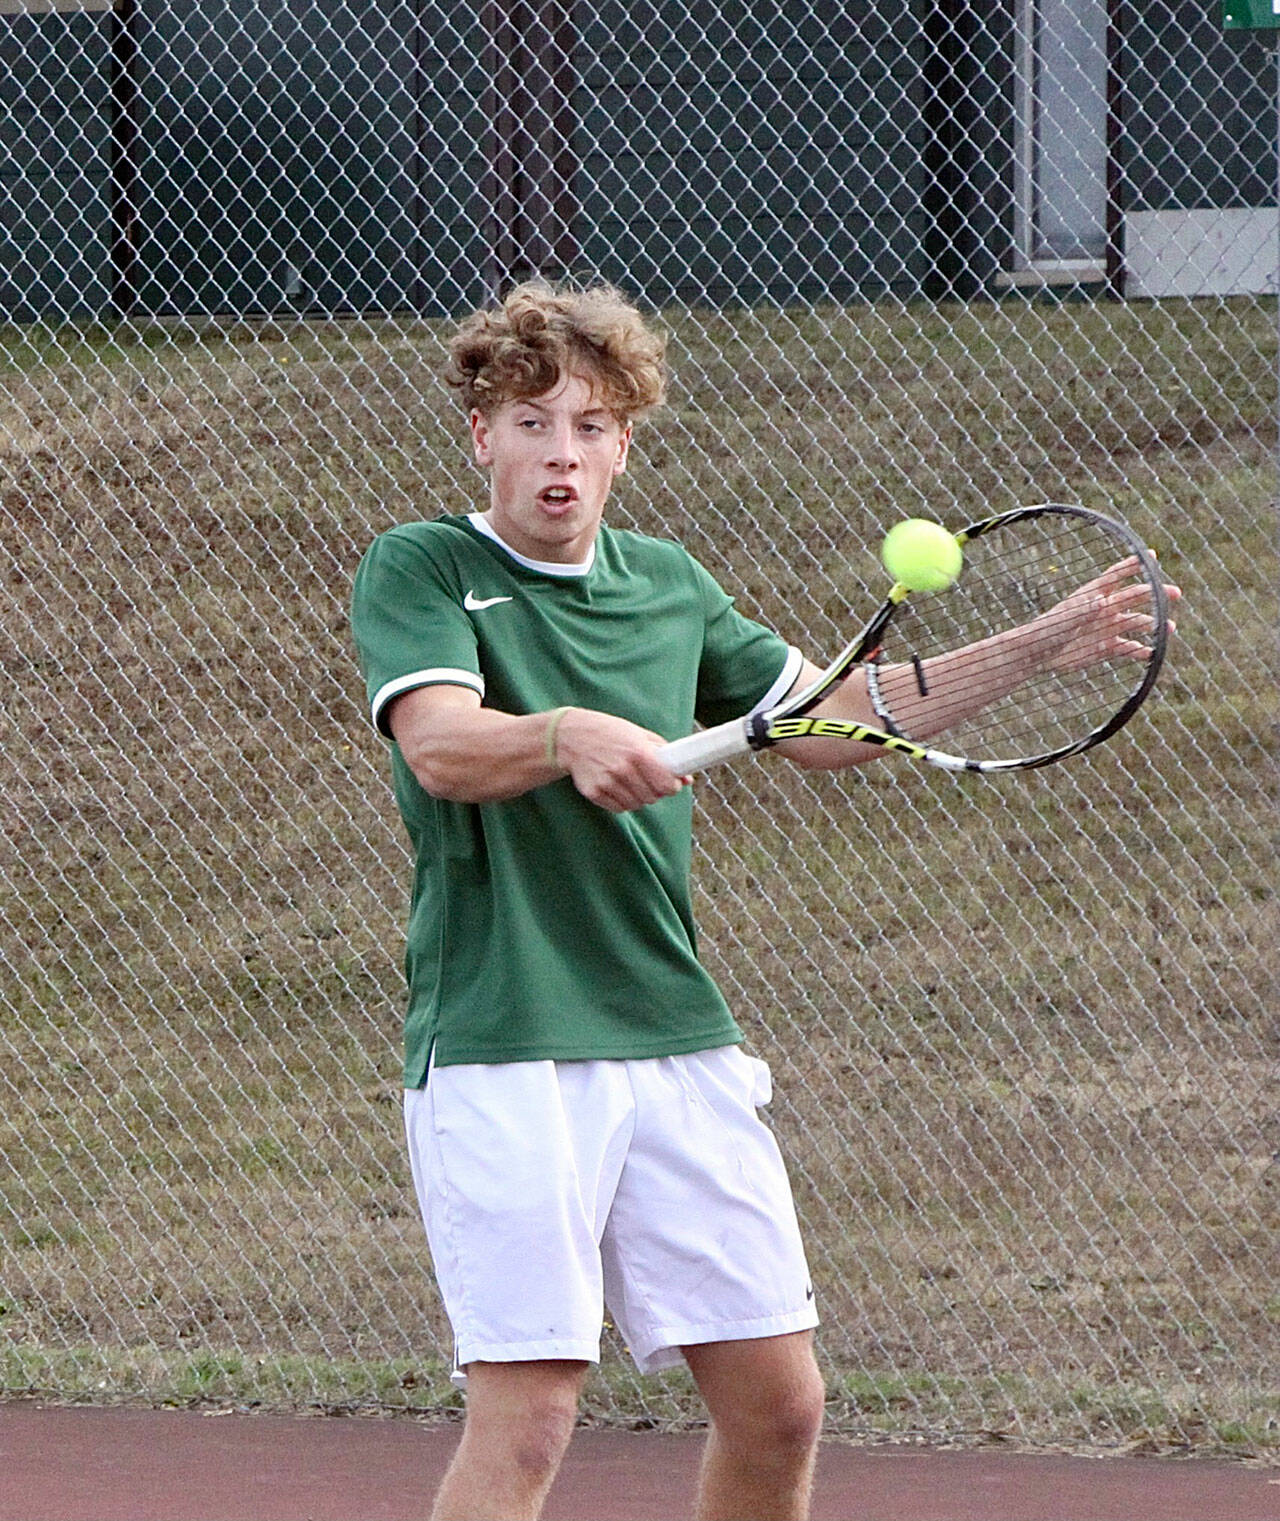 Port Angeles’ No. 1 boys tennis singles player Reef Gelder backhands a volley in the team’s match against North Kitsap on Monday. (Dave Logan/for Peninsula Daily News)